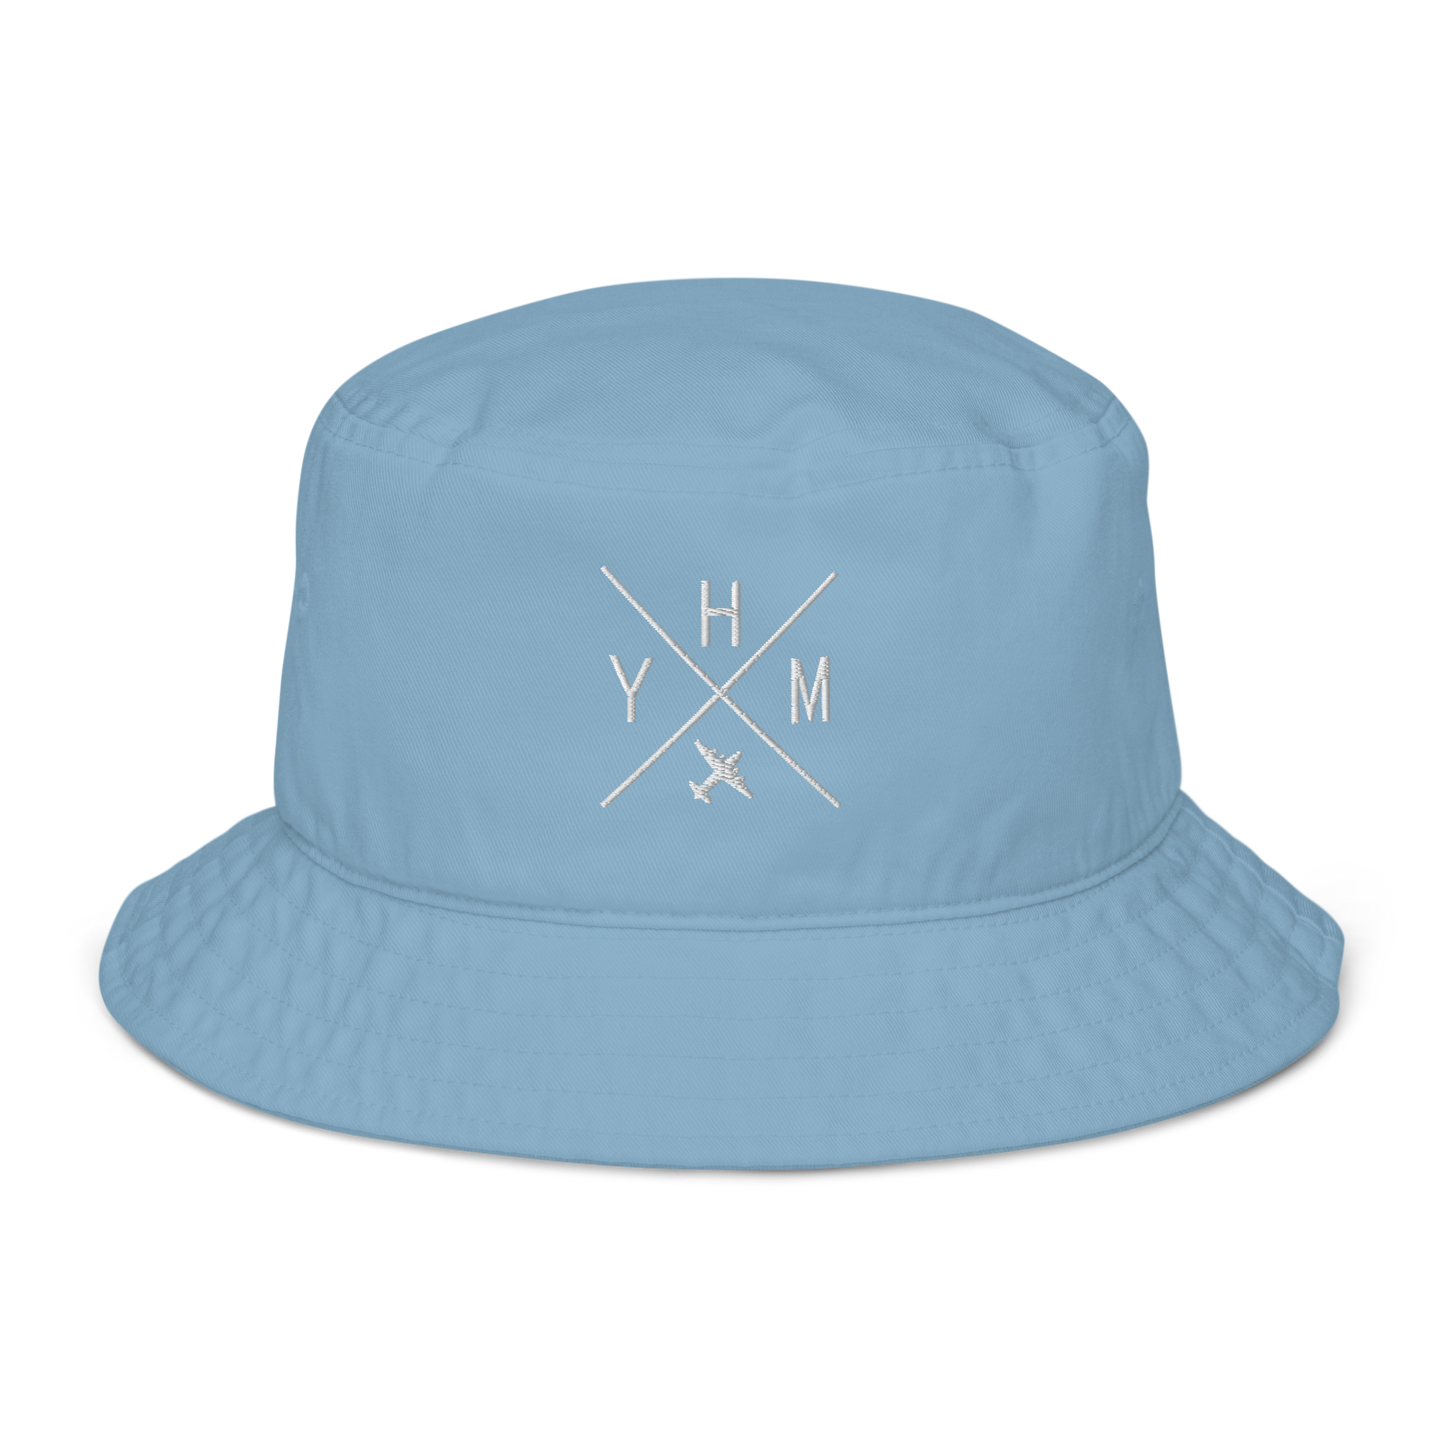 YHM Designs - YHM Hamilton Organic Cotton Bucket Hat - Crossed-X Design with Airport Code and Vintage Propliner - White Embroidery - Image 07